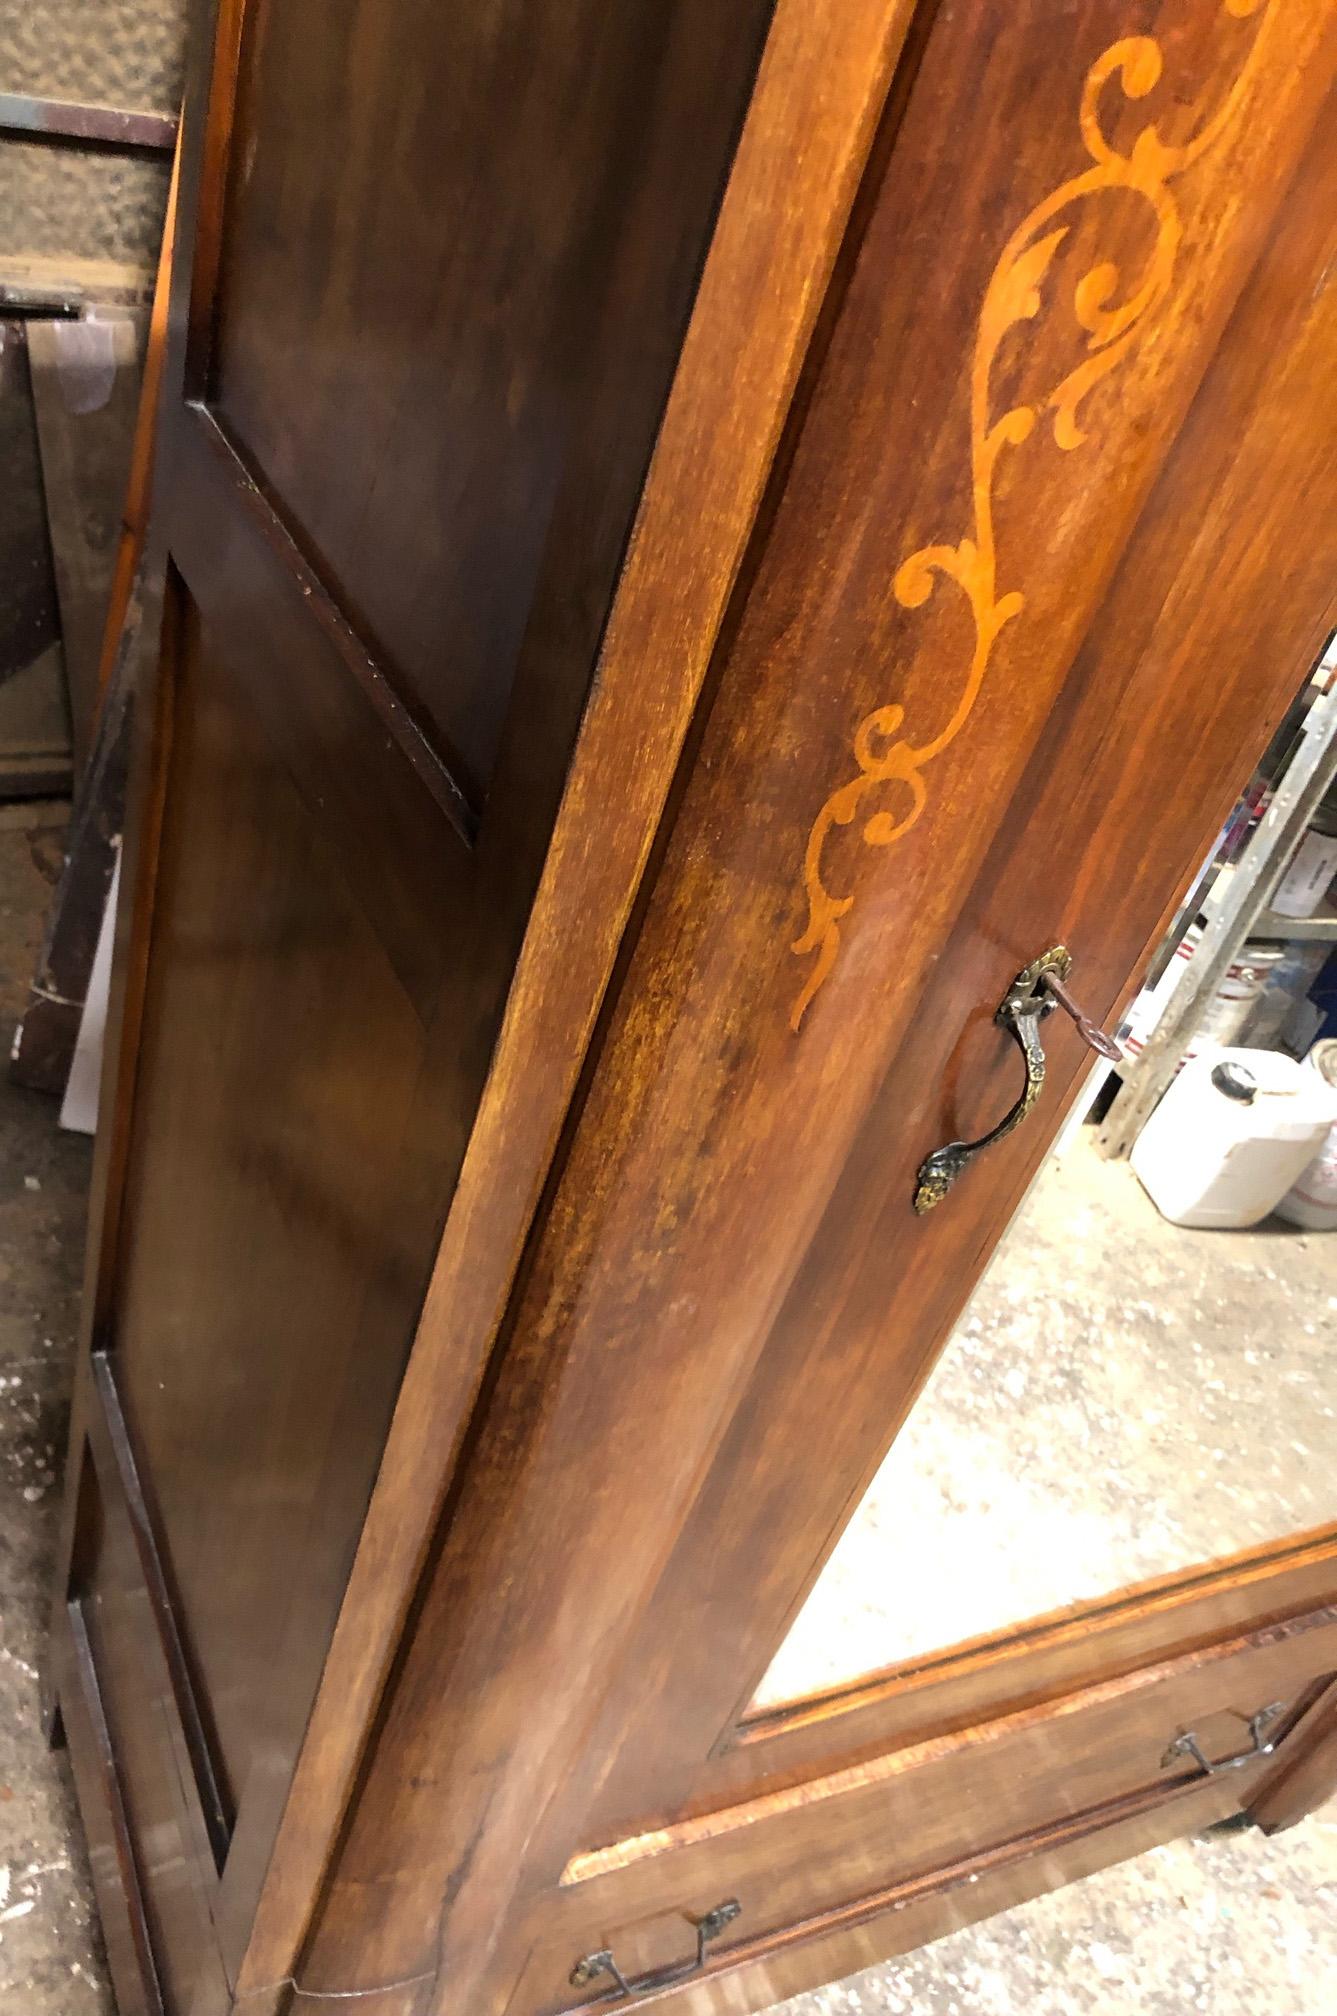 20th Italian wardrobe in inlaid walnut with original mirror on door.
Inside it has a shelf and a clothes rail.
Inlays made by hand.
Original handles. 
All parts and locks are functional. 
Among my articles belonging to the same house, I have